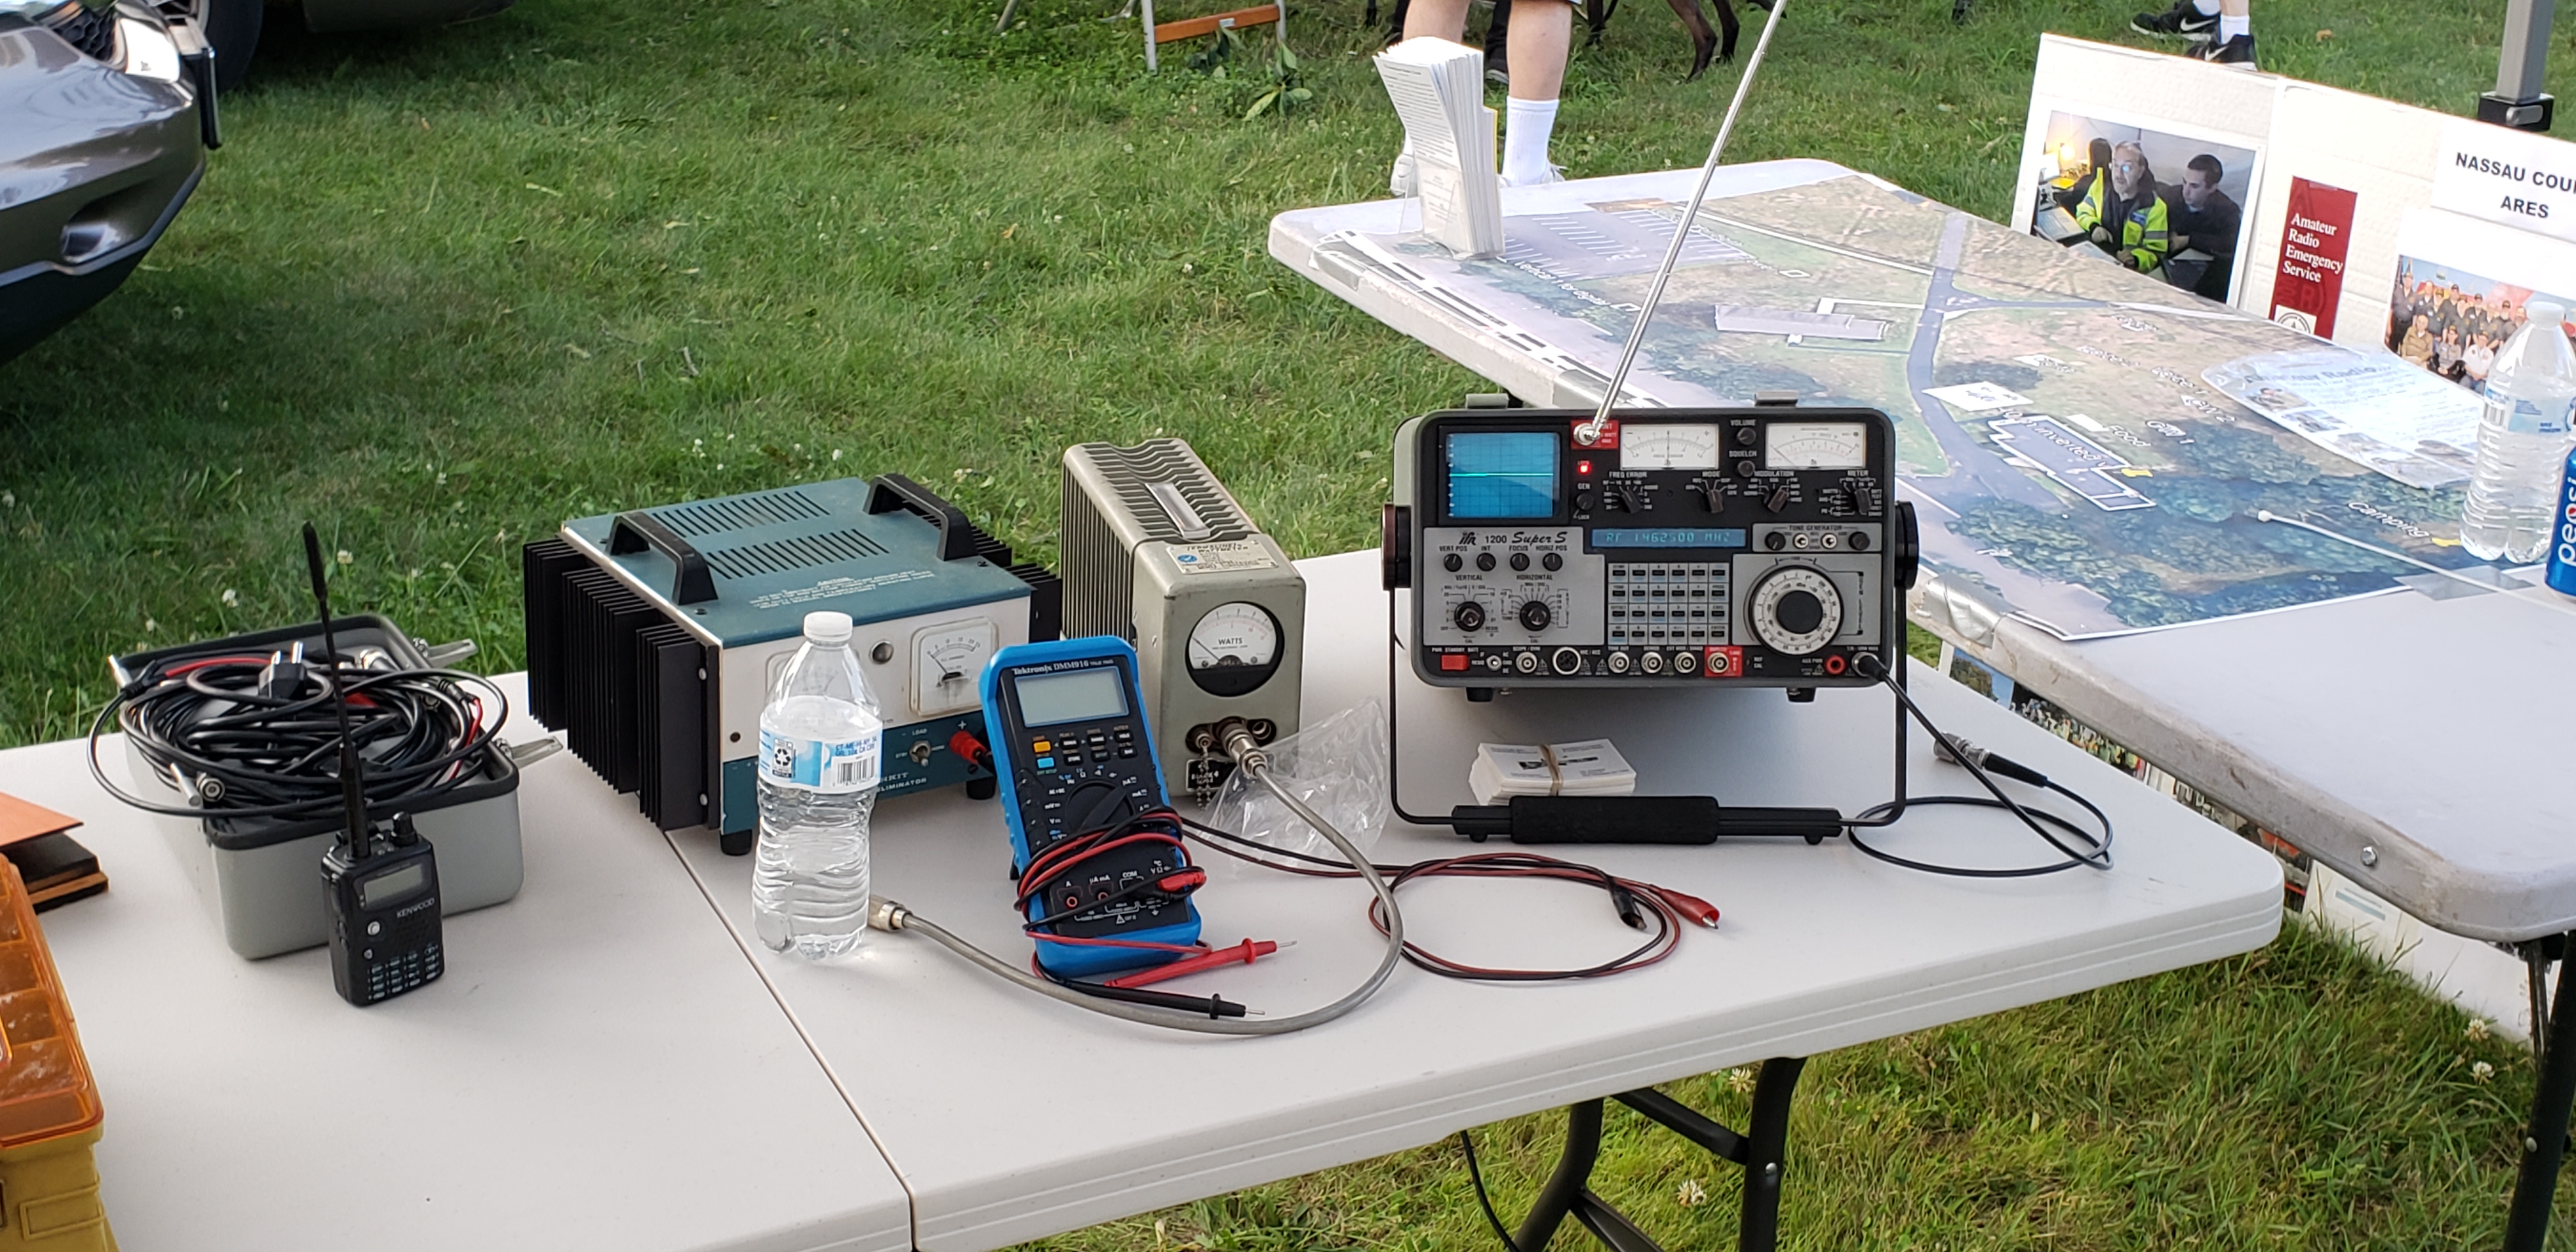 Tune-up-table-at-Field-Day